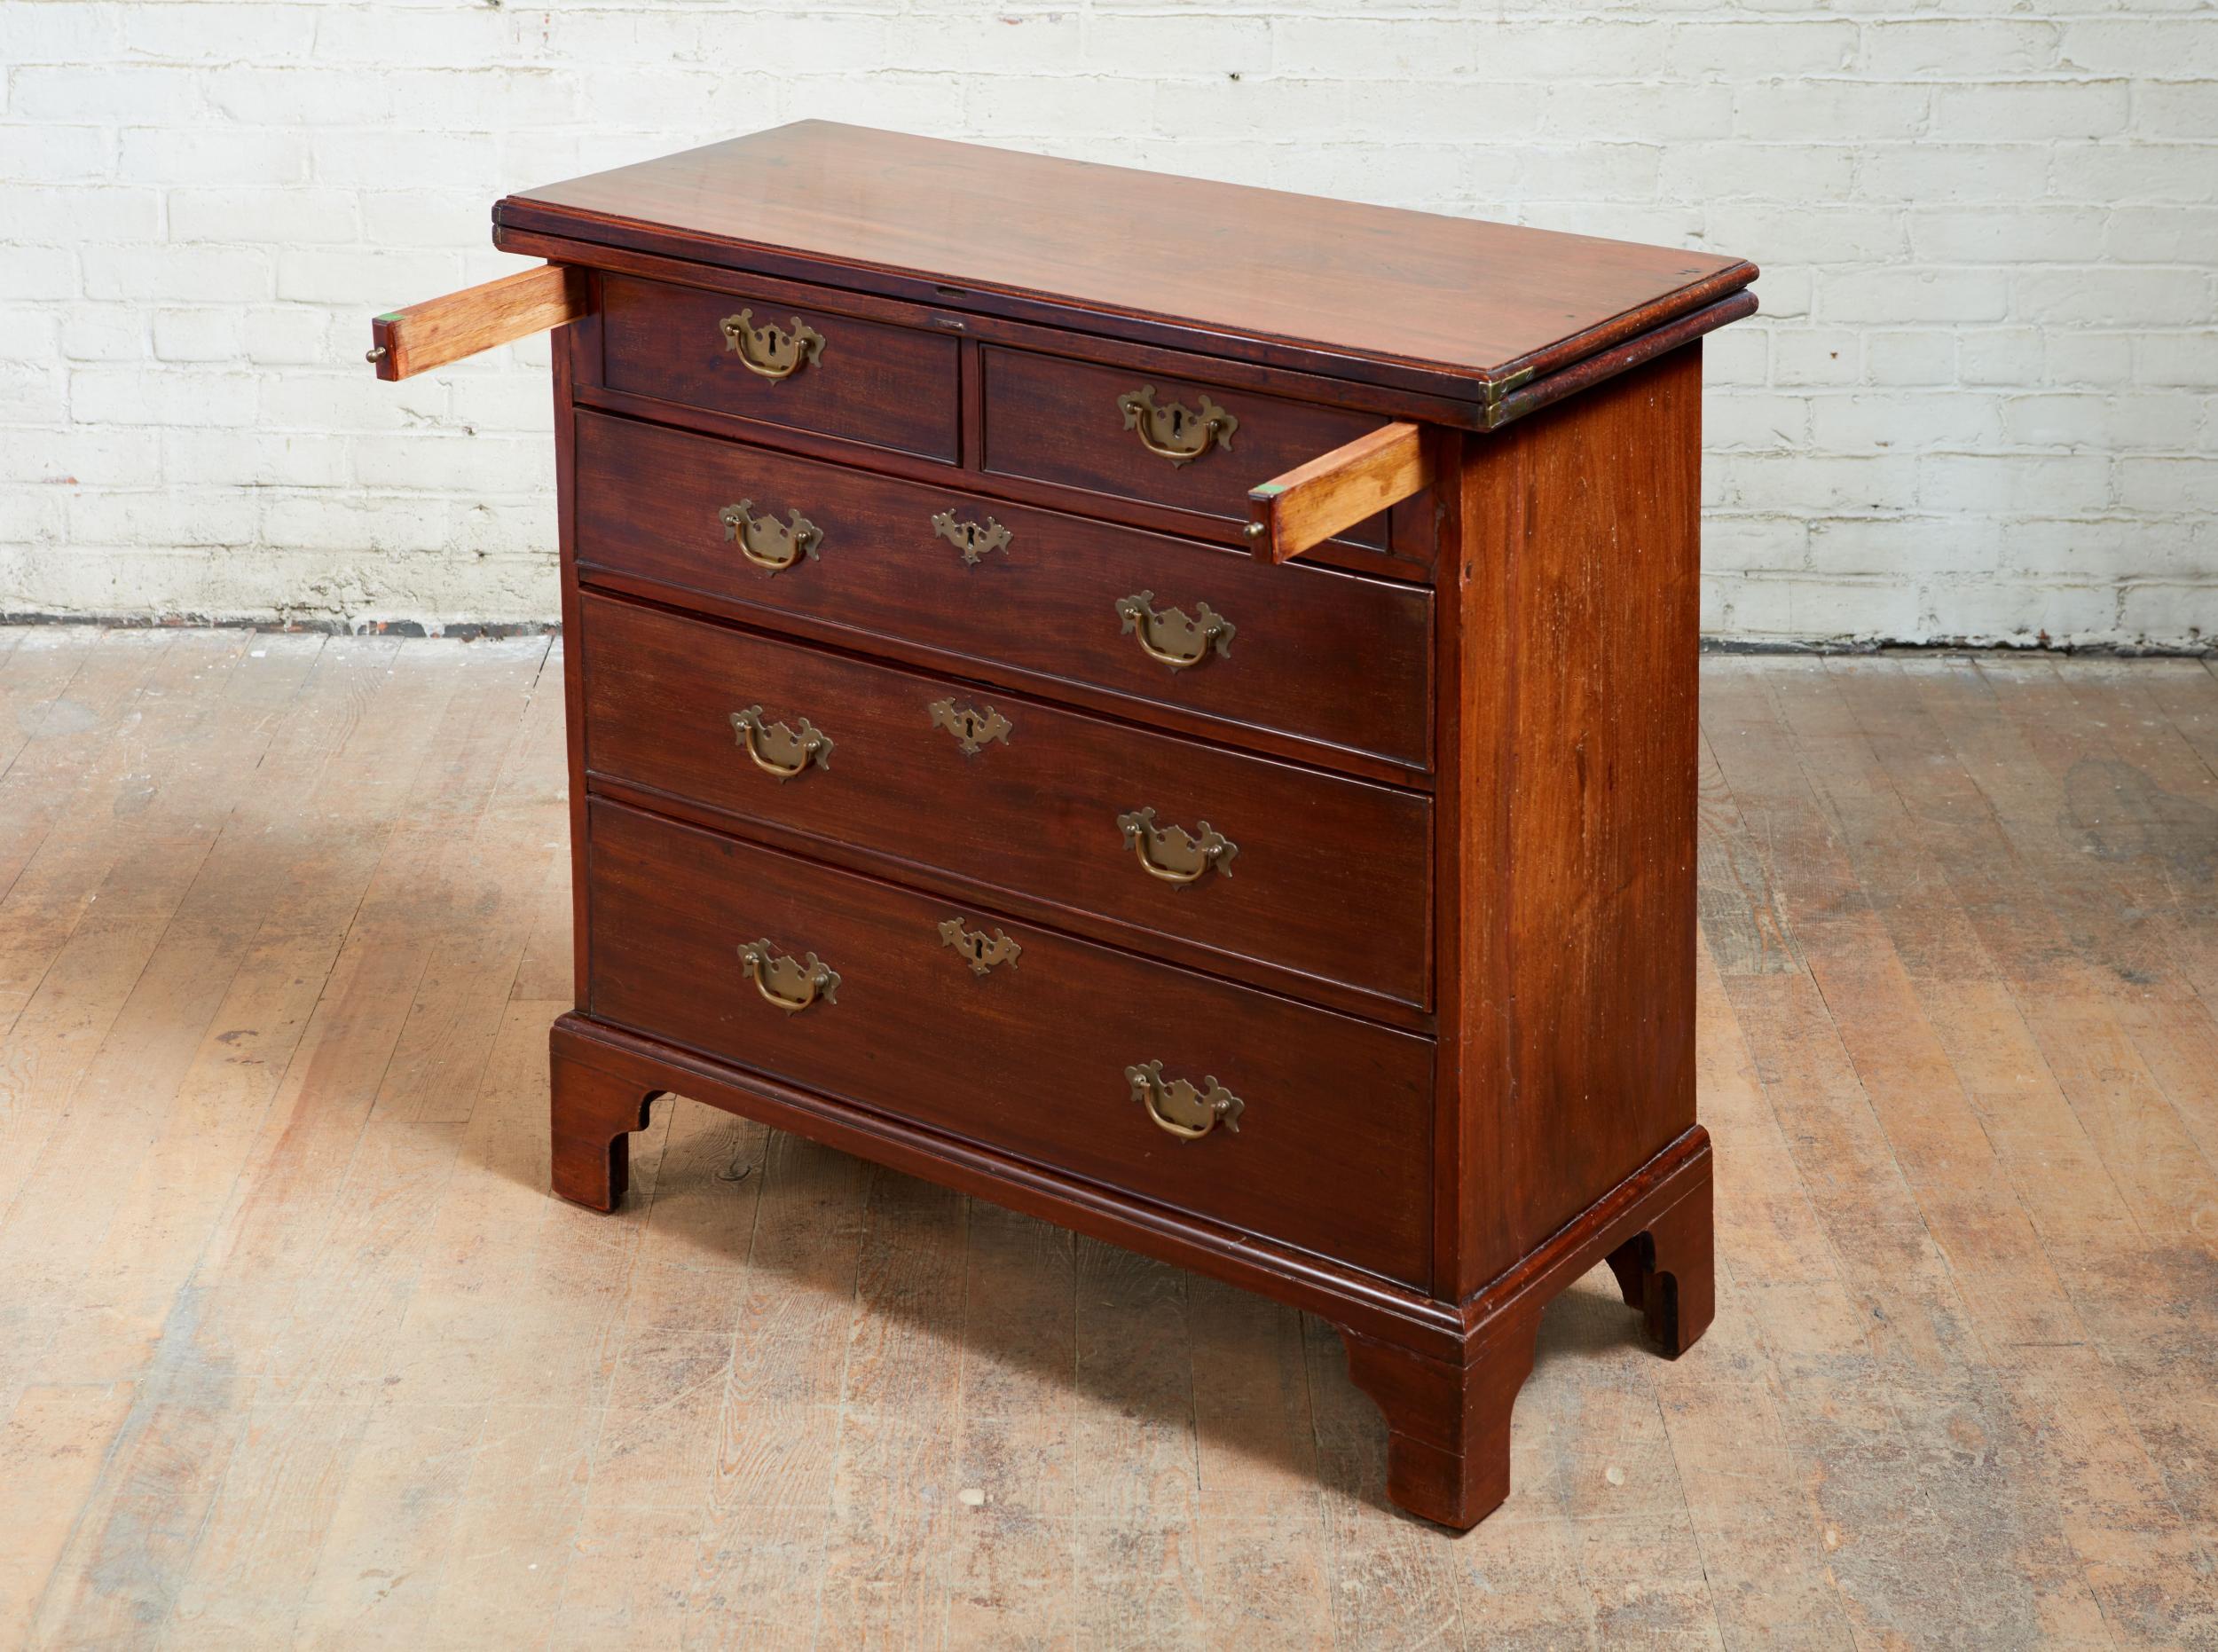 Fine George III mahogany bachelor's chest, the richly grained fold over top with molded edge, over two short and three long drawers, and standing on original bracket feet, the whole with nice old surface and patination.